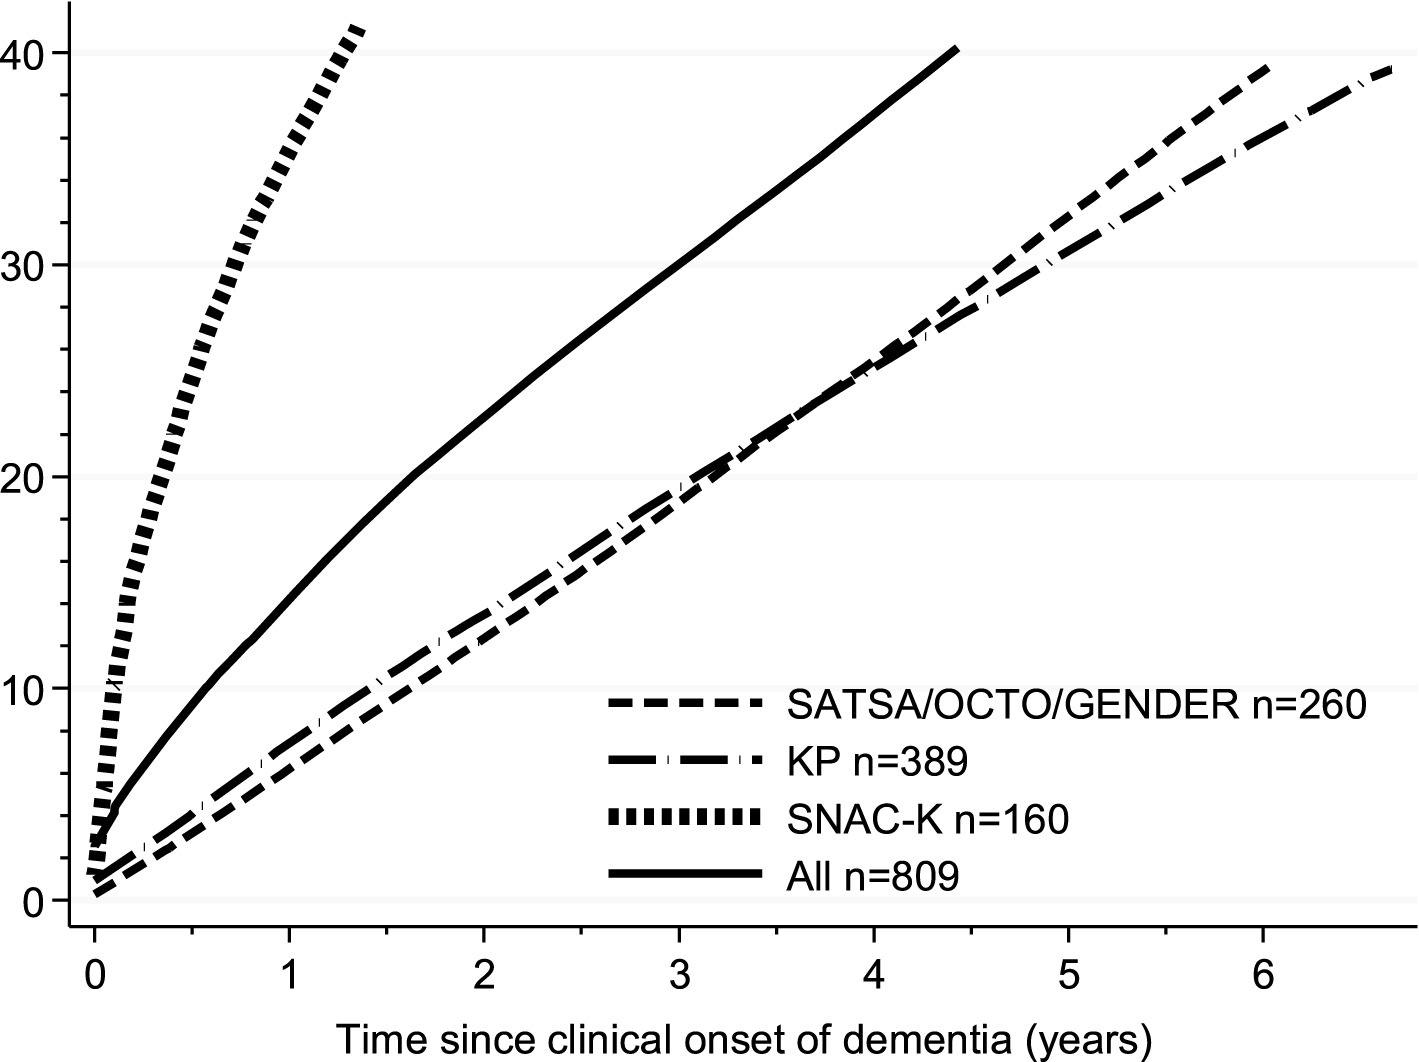 Cumulative proportion of being detected in the National Patient Register (NPR) after clinical diagnosis in the population based studies (incident cases). Curves were calculated by estimating a Laplace regression model for all percentiles from the 1st to the 40th, adjusting for age of dementia onset, sex, and education. KP, Kungsholmen Project; SATSA, Swedish Adoption/Twin Study of Aging; OCTO-Twin; Origins of Variance among Oldest-Old; GENDER, Study of Gender Differences in Health Behaviors and Health among Elderly; SNAC-K, Swedish National study on Aging and Care in Kungsholmen.